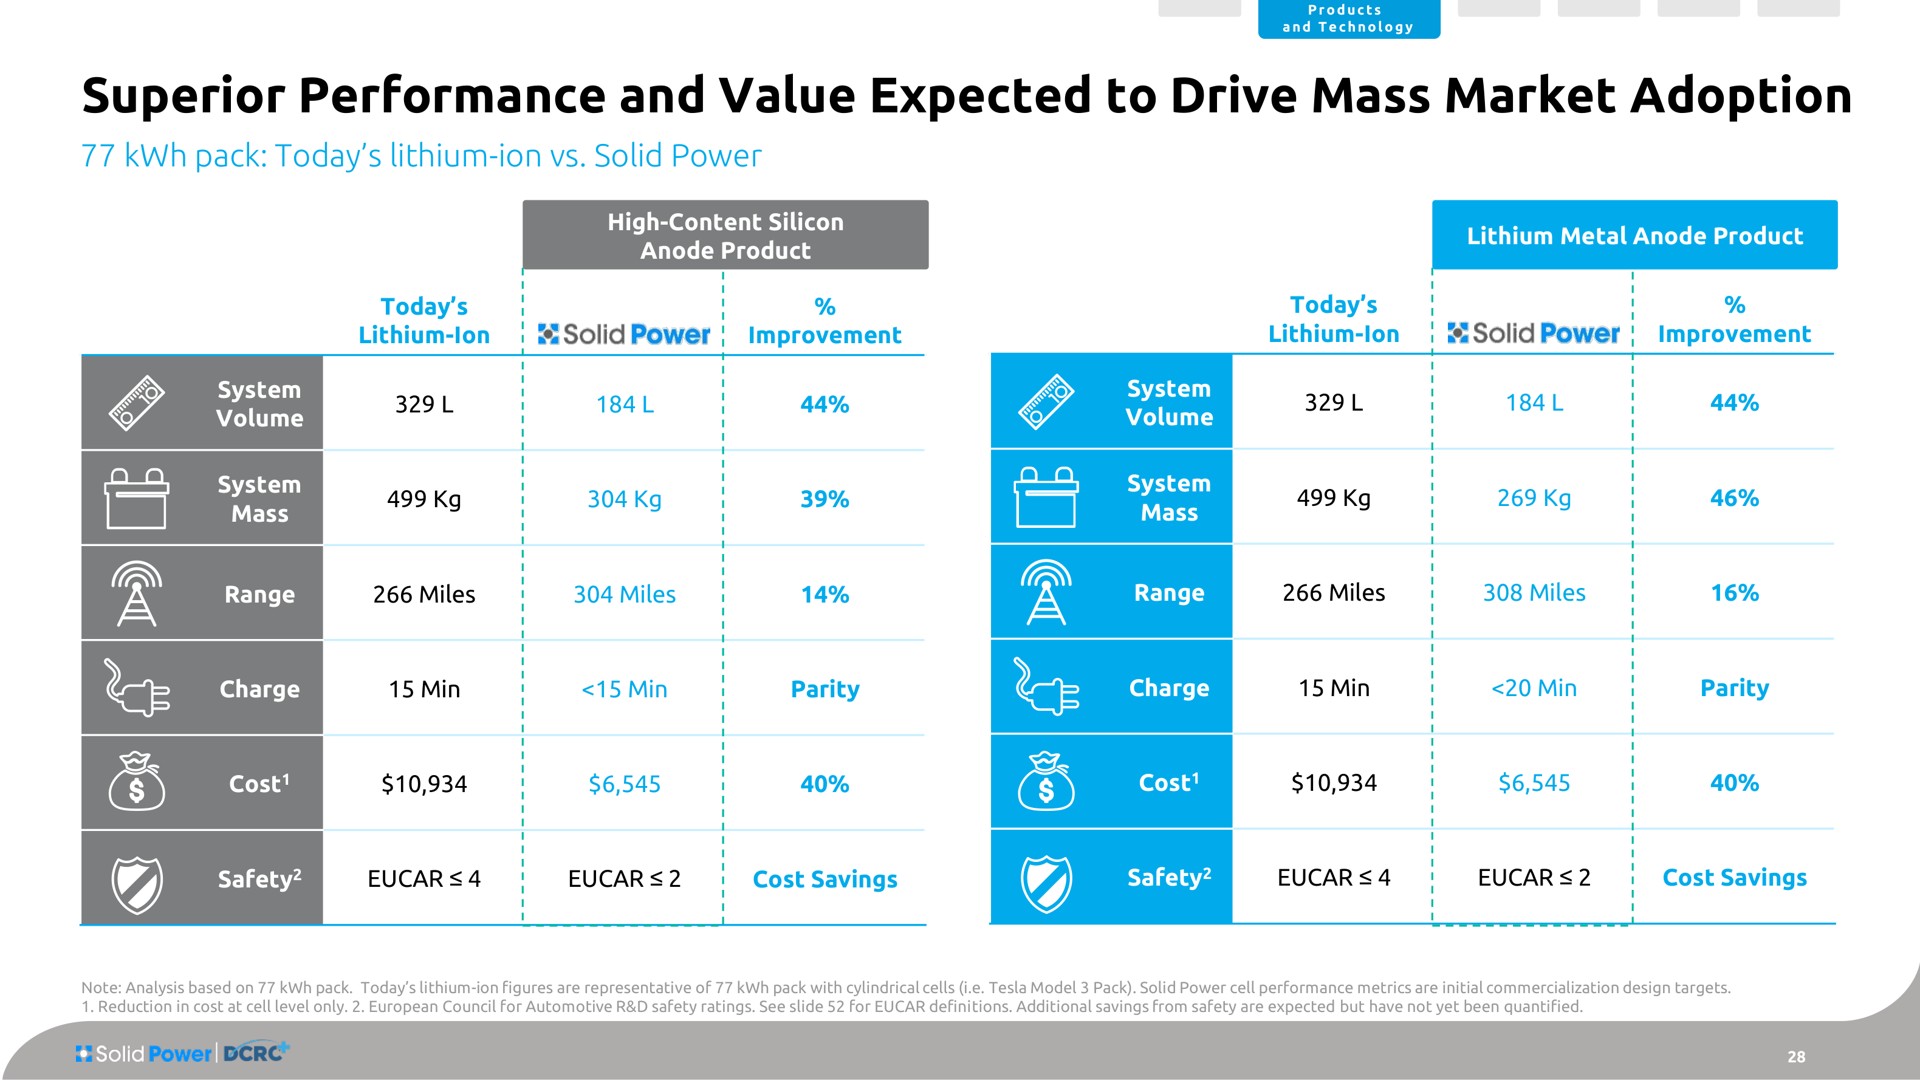 superior performance and value expected to drive mass market adoption pack today lithium ion solid power | Solid Power